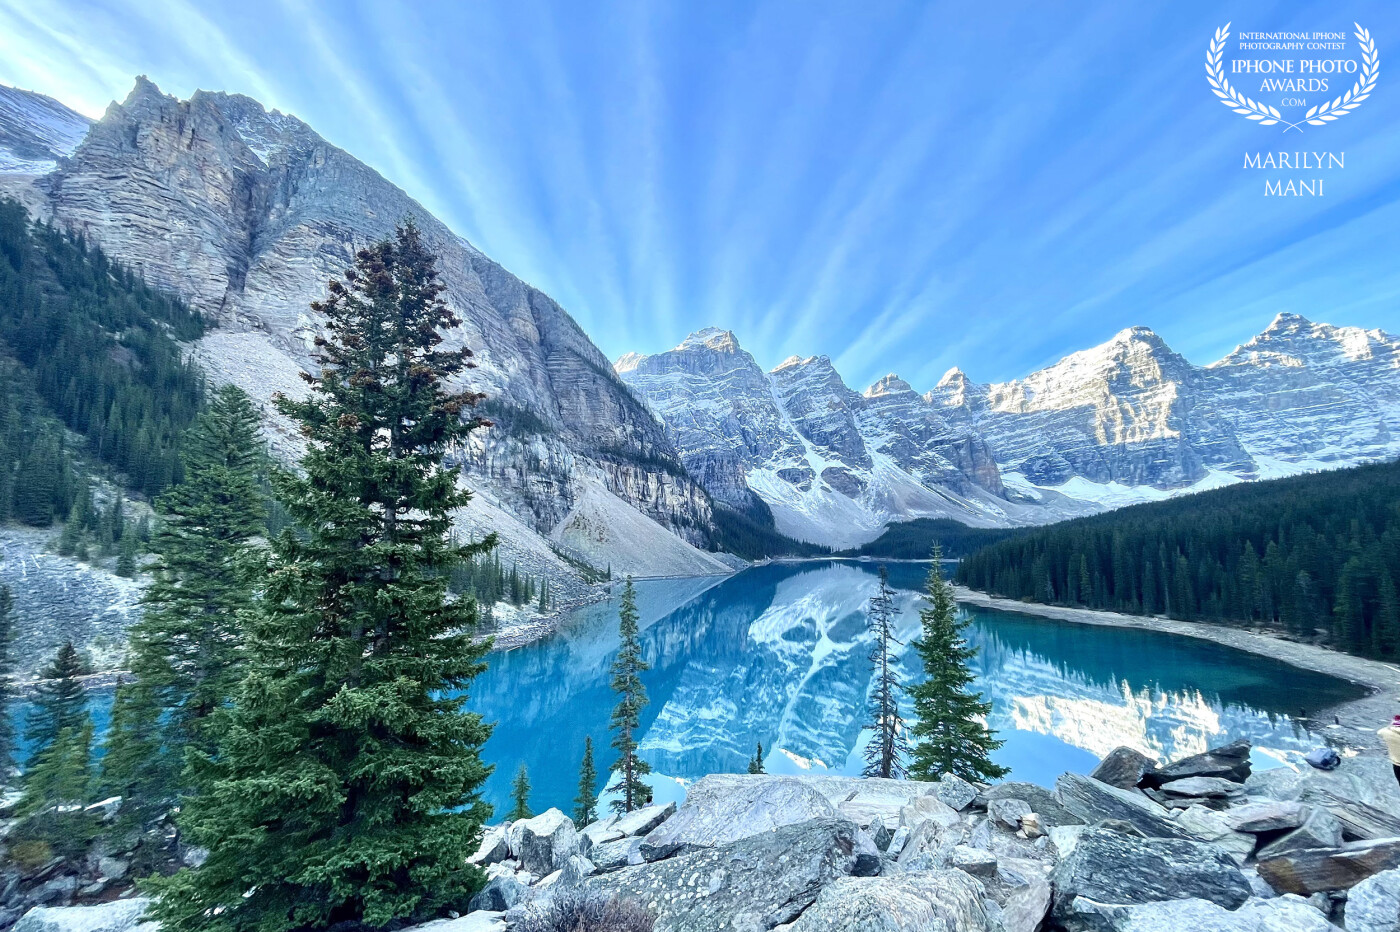 Moraine Lake in all its glory. This is a photographer’s dream come true. An early morning walk to capture this view felt like a dream! The clouds were on my side too with that pattern!